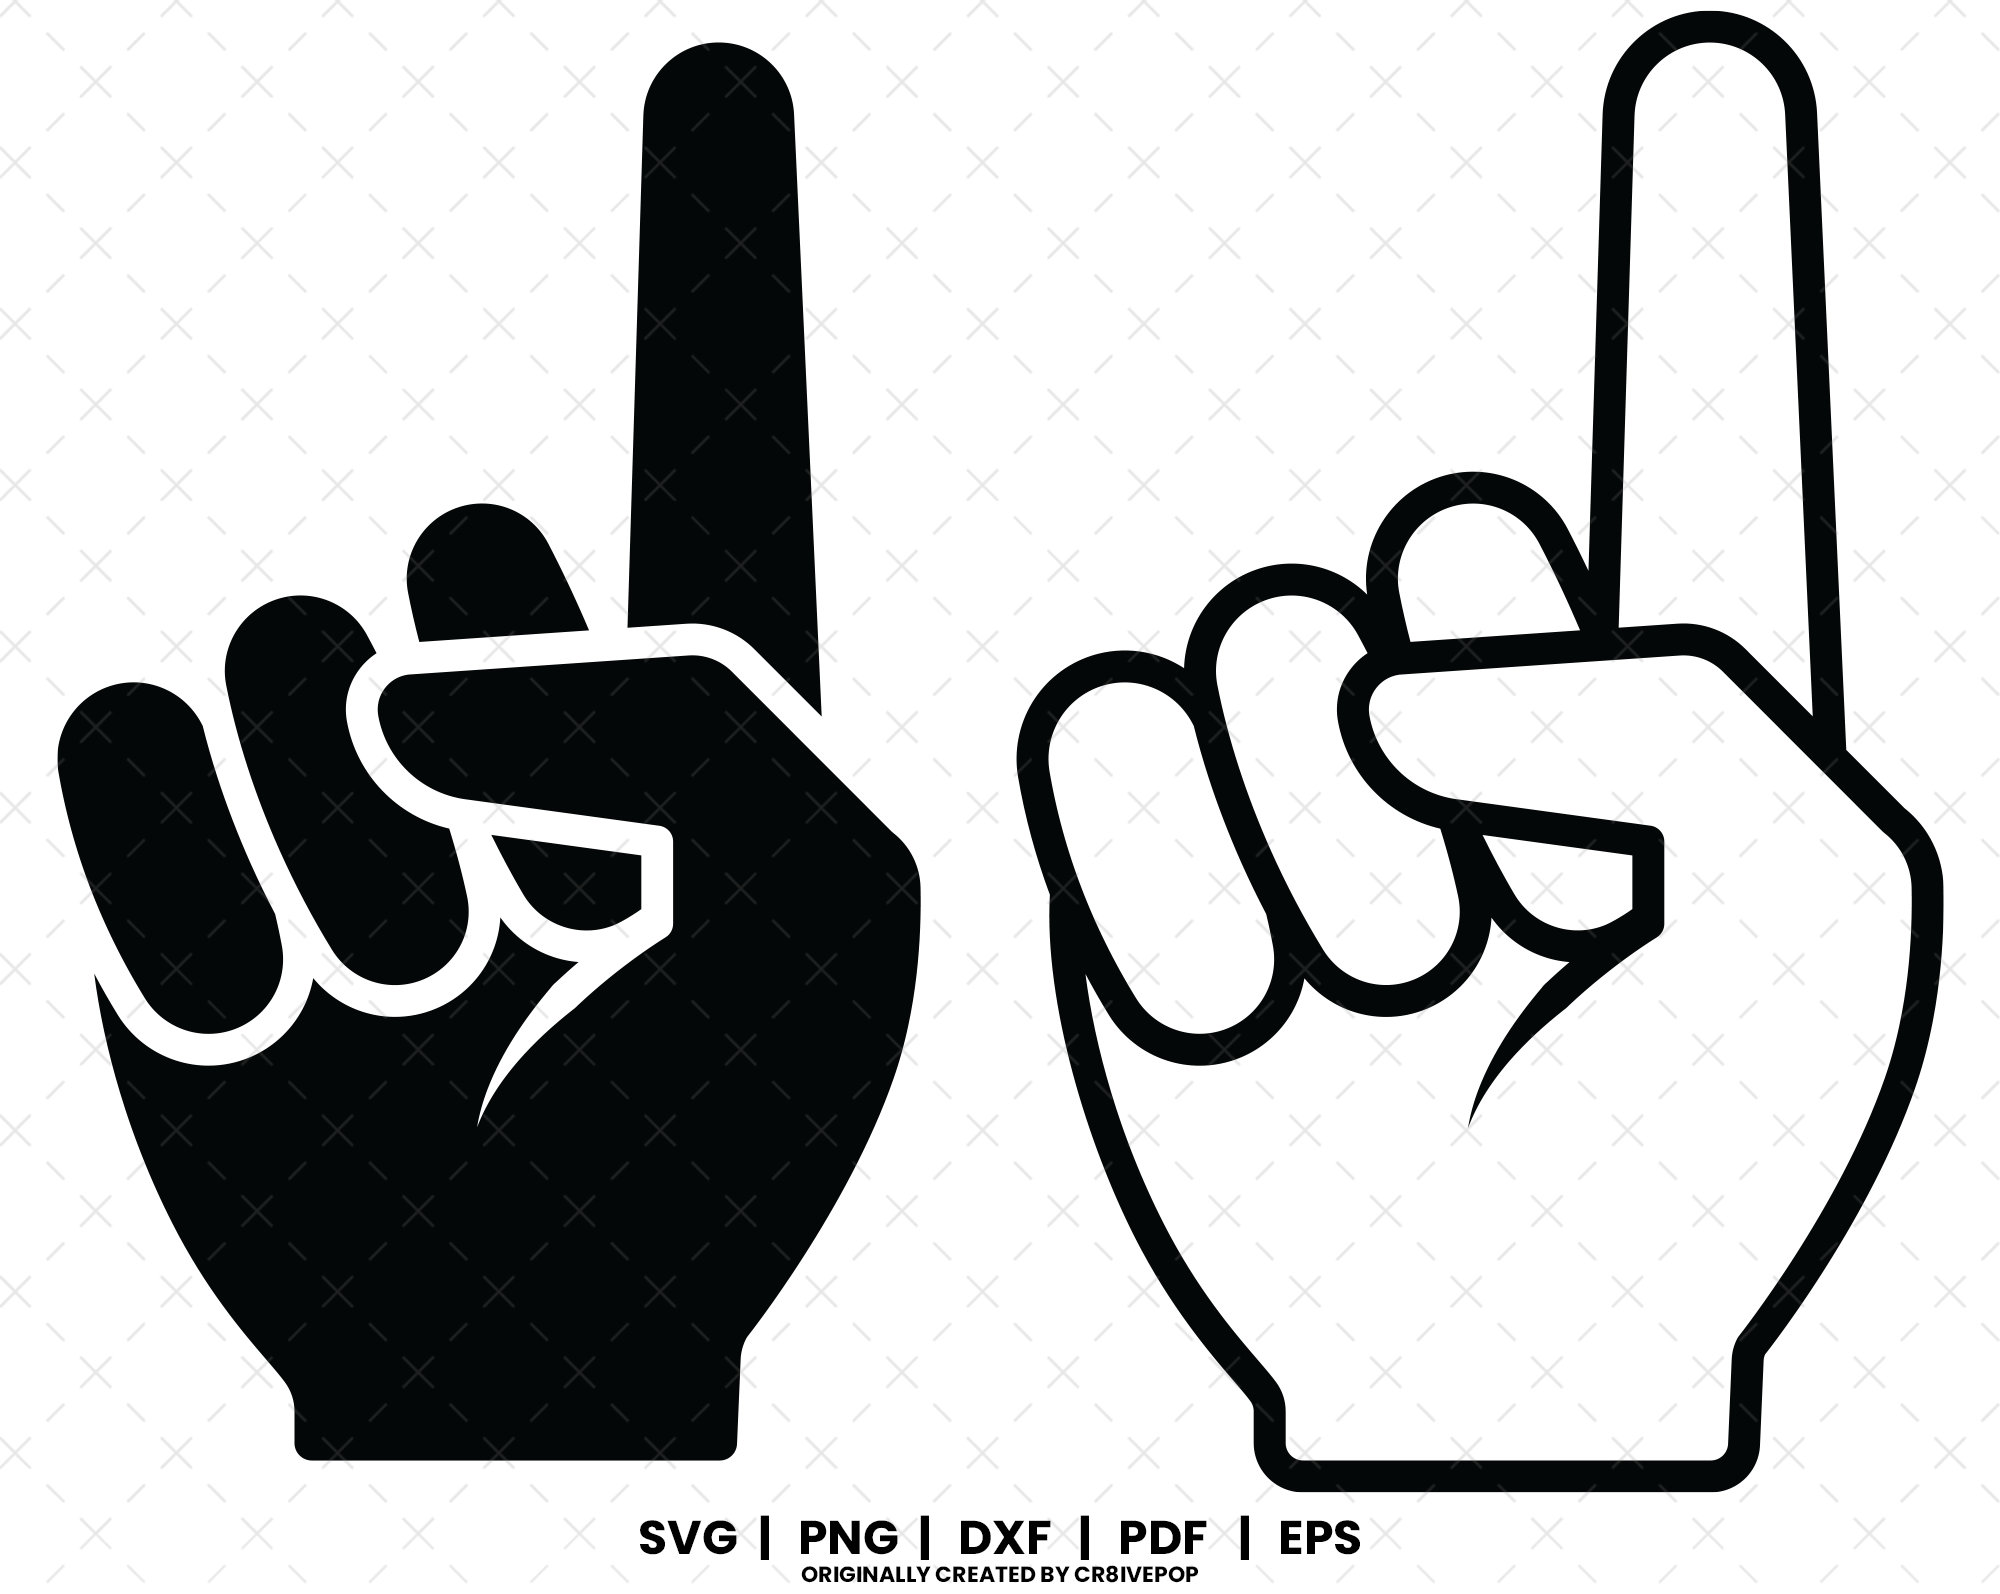 Number one hand gesture.ai Royalty Free Stock SVG Vector and Clip Art